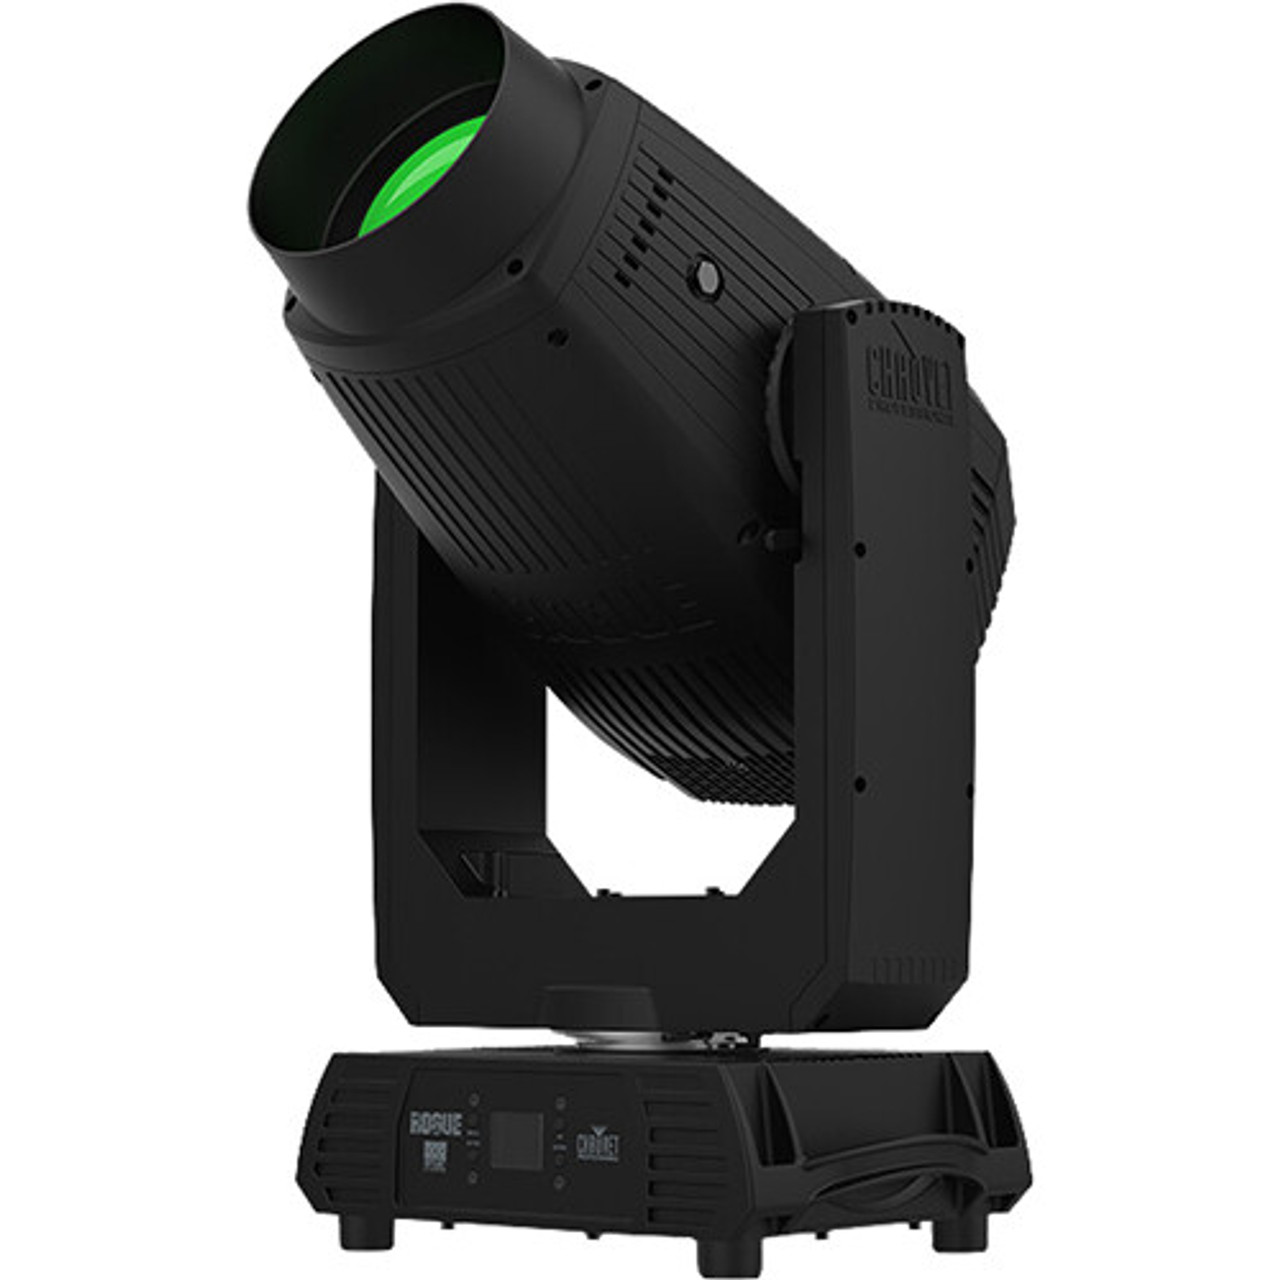 CHAUVET PROFESSIONAL Rogue Outcast 2 Hybrid Outdoor-Ready IP65 Spot, Beam, and Wash Moving Head (ROGUEOUTCAST2HYBRID)